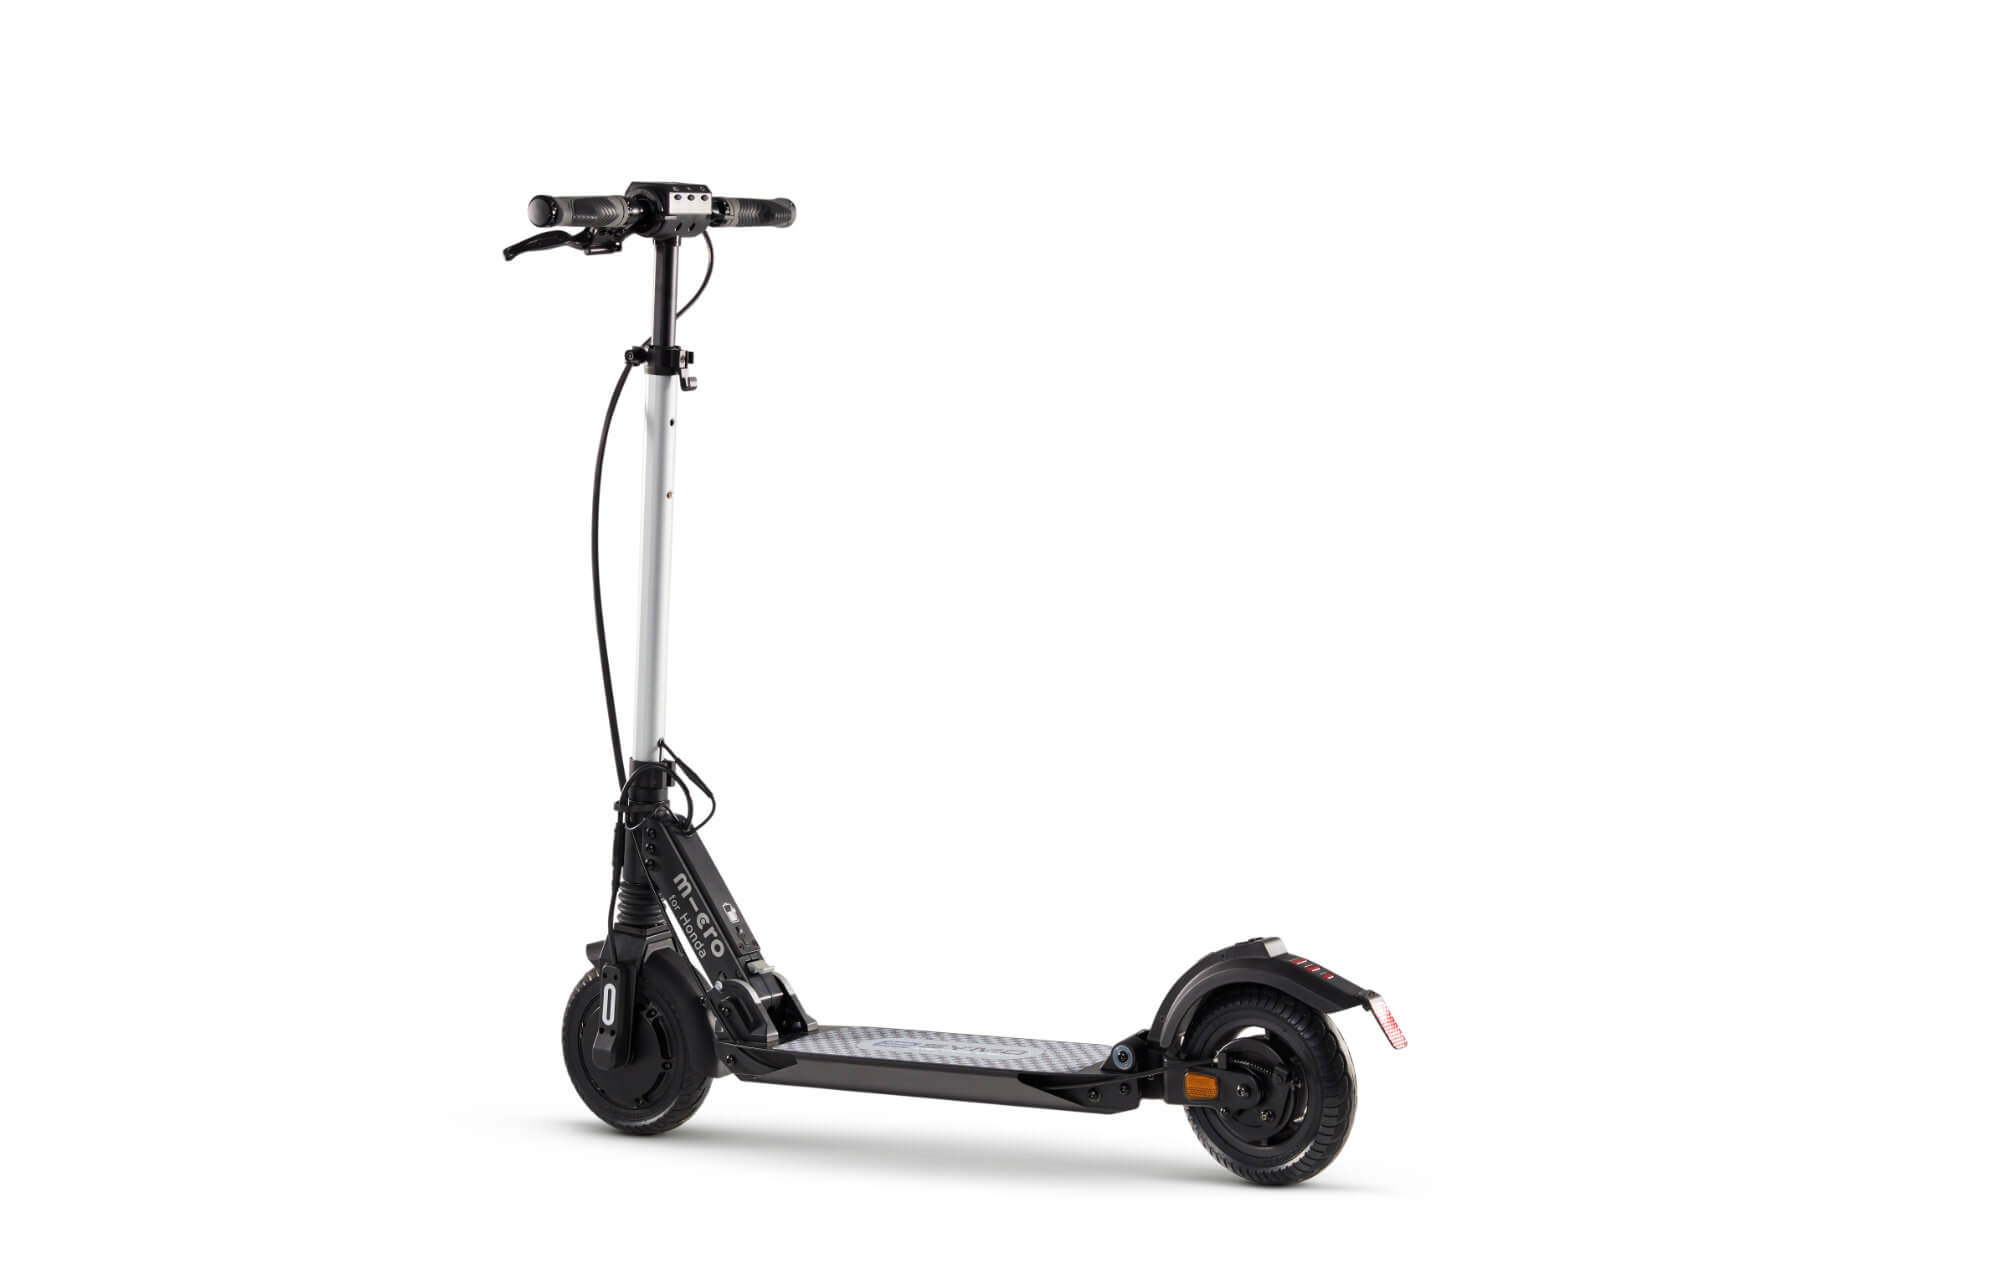 Discover the eSYMO e-Kick Scooter available now